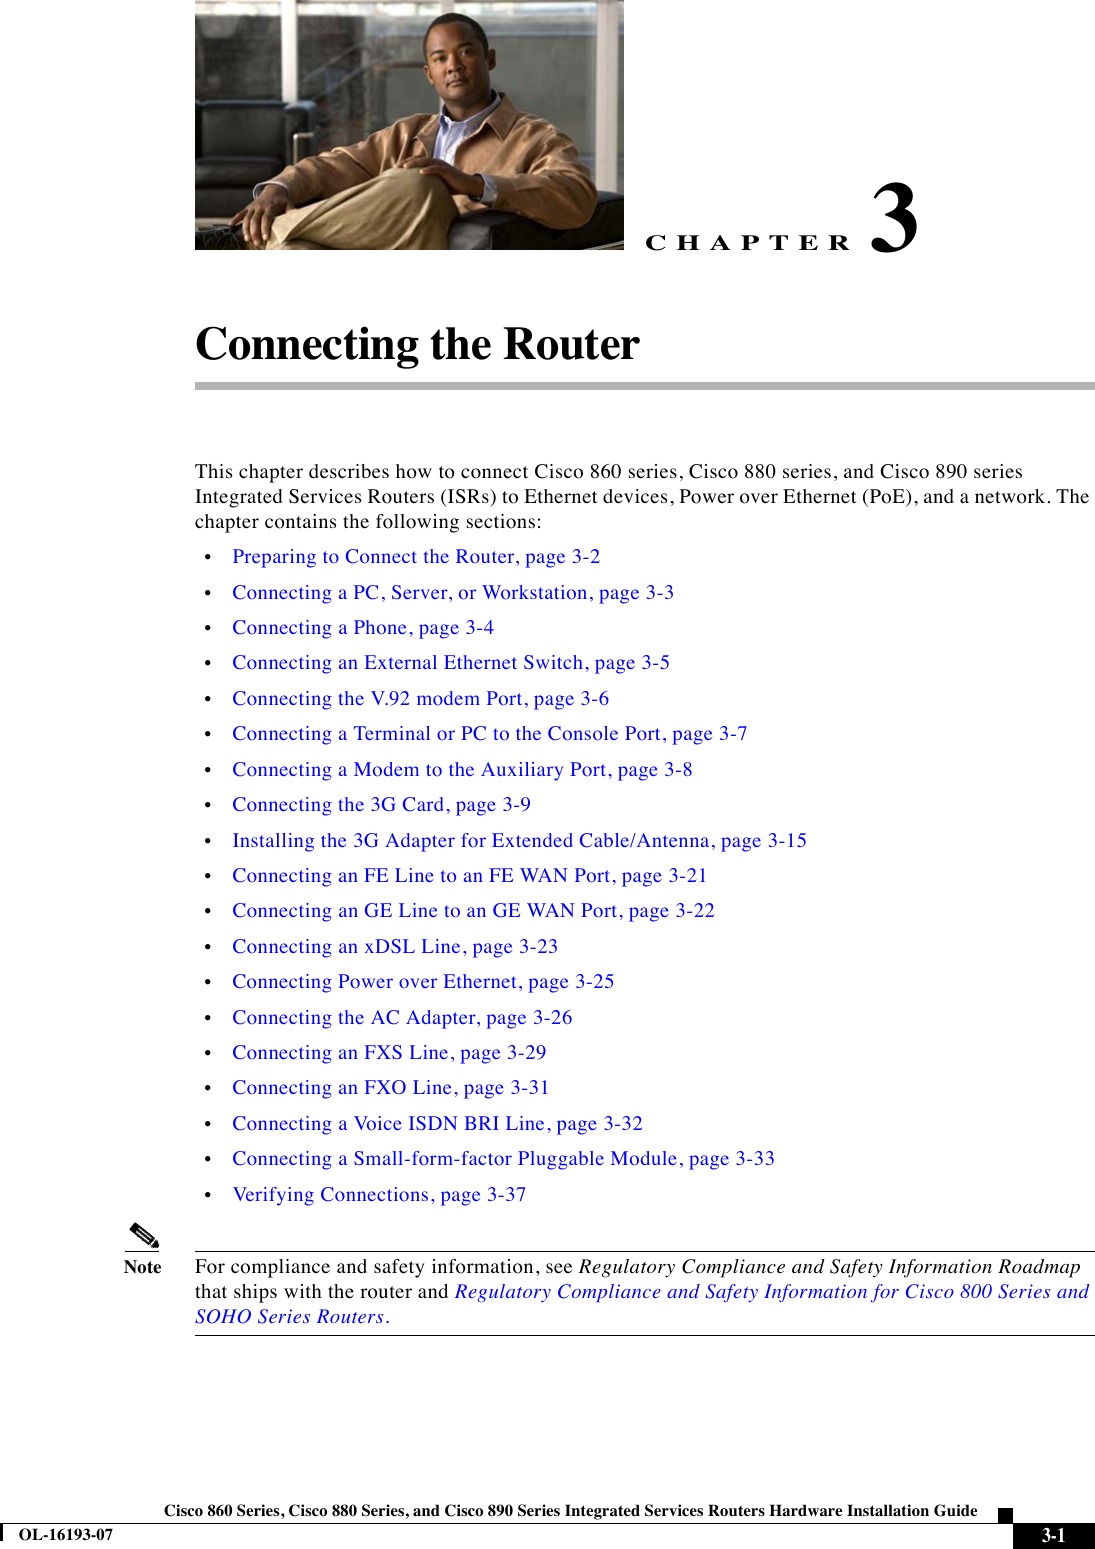 CHAPTER 3-1Cisco 860 Series, Cisco 880 Series, and Cisco 890 Series Integrated Services Routers Hardware Installation GuideOL-16193-073Connecting the RouterThis chapter describes how to connect Cisco 860 series, Cisco 880 series, and Cisco 890 series Integrated Services Routers (ISRs) to Ethernet devices, Power over Ethernet (PoE), and a network. The chapter contains the following sections:  •Preparing to Connect the Router, page 3-2  •Connecting a PC, Server, or Workstation, page 3-3  •Connecting a Phone, page 3-4  •Connecting an External Ethernet Switch, page 3-5  •Connecting the V.92 modem Port, page 3-6  •Connecting a Terminal or PC to the Console Port, page 3-7  •Connecting a Modem to the Auxiliary Port, page 3-8  •Connecting the 3G Card, page 3-9  •Installing the 3G Adapter for Extended Cable/Antenna, page 3-15  •Connecting an FE Line to an FE WAN Port, page 3-21  •Connecting an GE Line to an GE WAN Port, page 3-22  •Connecting an xDSL Line, page 3-23  •Connecting Power over Ethernet, page 3-25  •Connecting the AC Adapter, page 3-26  •Connecting an FXS Line, page 3-29  •Connecting an FXO Line, page 3-31  •Connecting a Voice ISDN BRI Line, page 3-32  •Connecting a Small-form-factor Pluggable Module, page 3-33  •Verifying Connections, page 3-37NoteFor compliance and safety information, see Regulatory Compliance and Safety Information Roadmap that ships with the router and Regulatory Compliance and Safety Information for Cisco 800 Series and SOHO Series Routers.